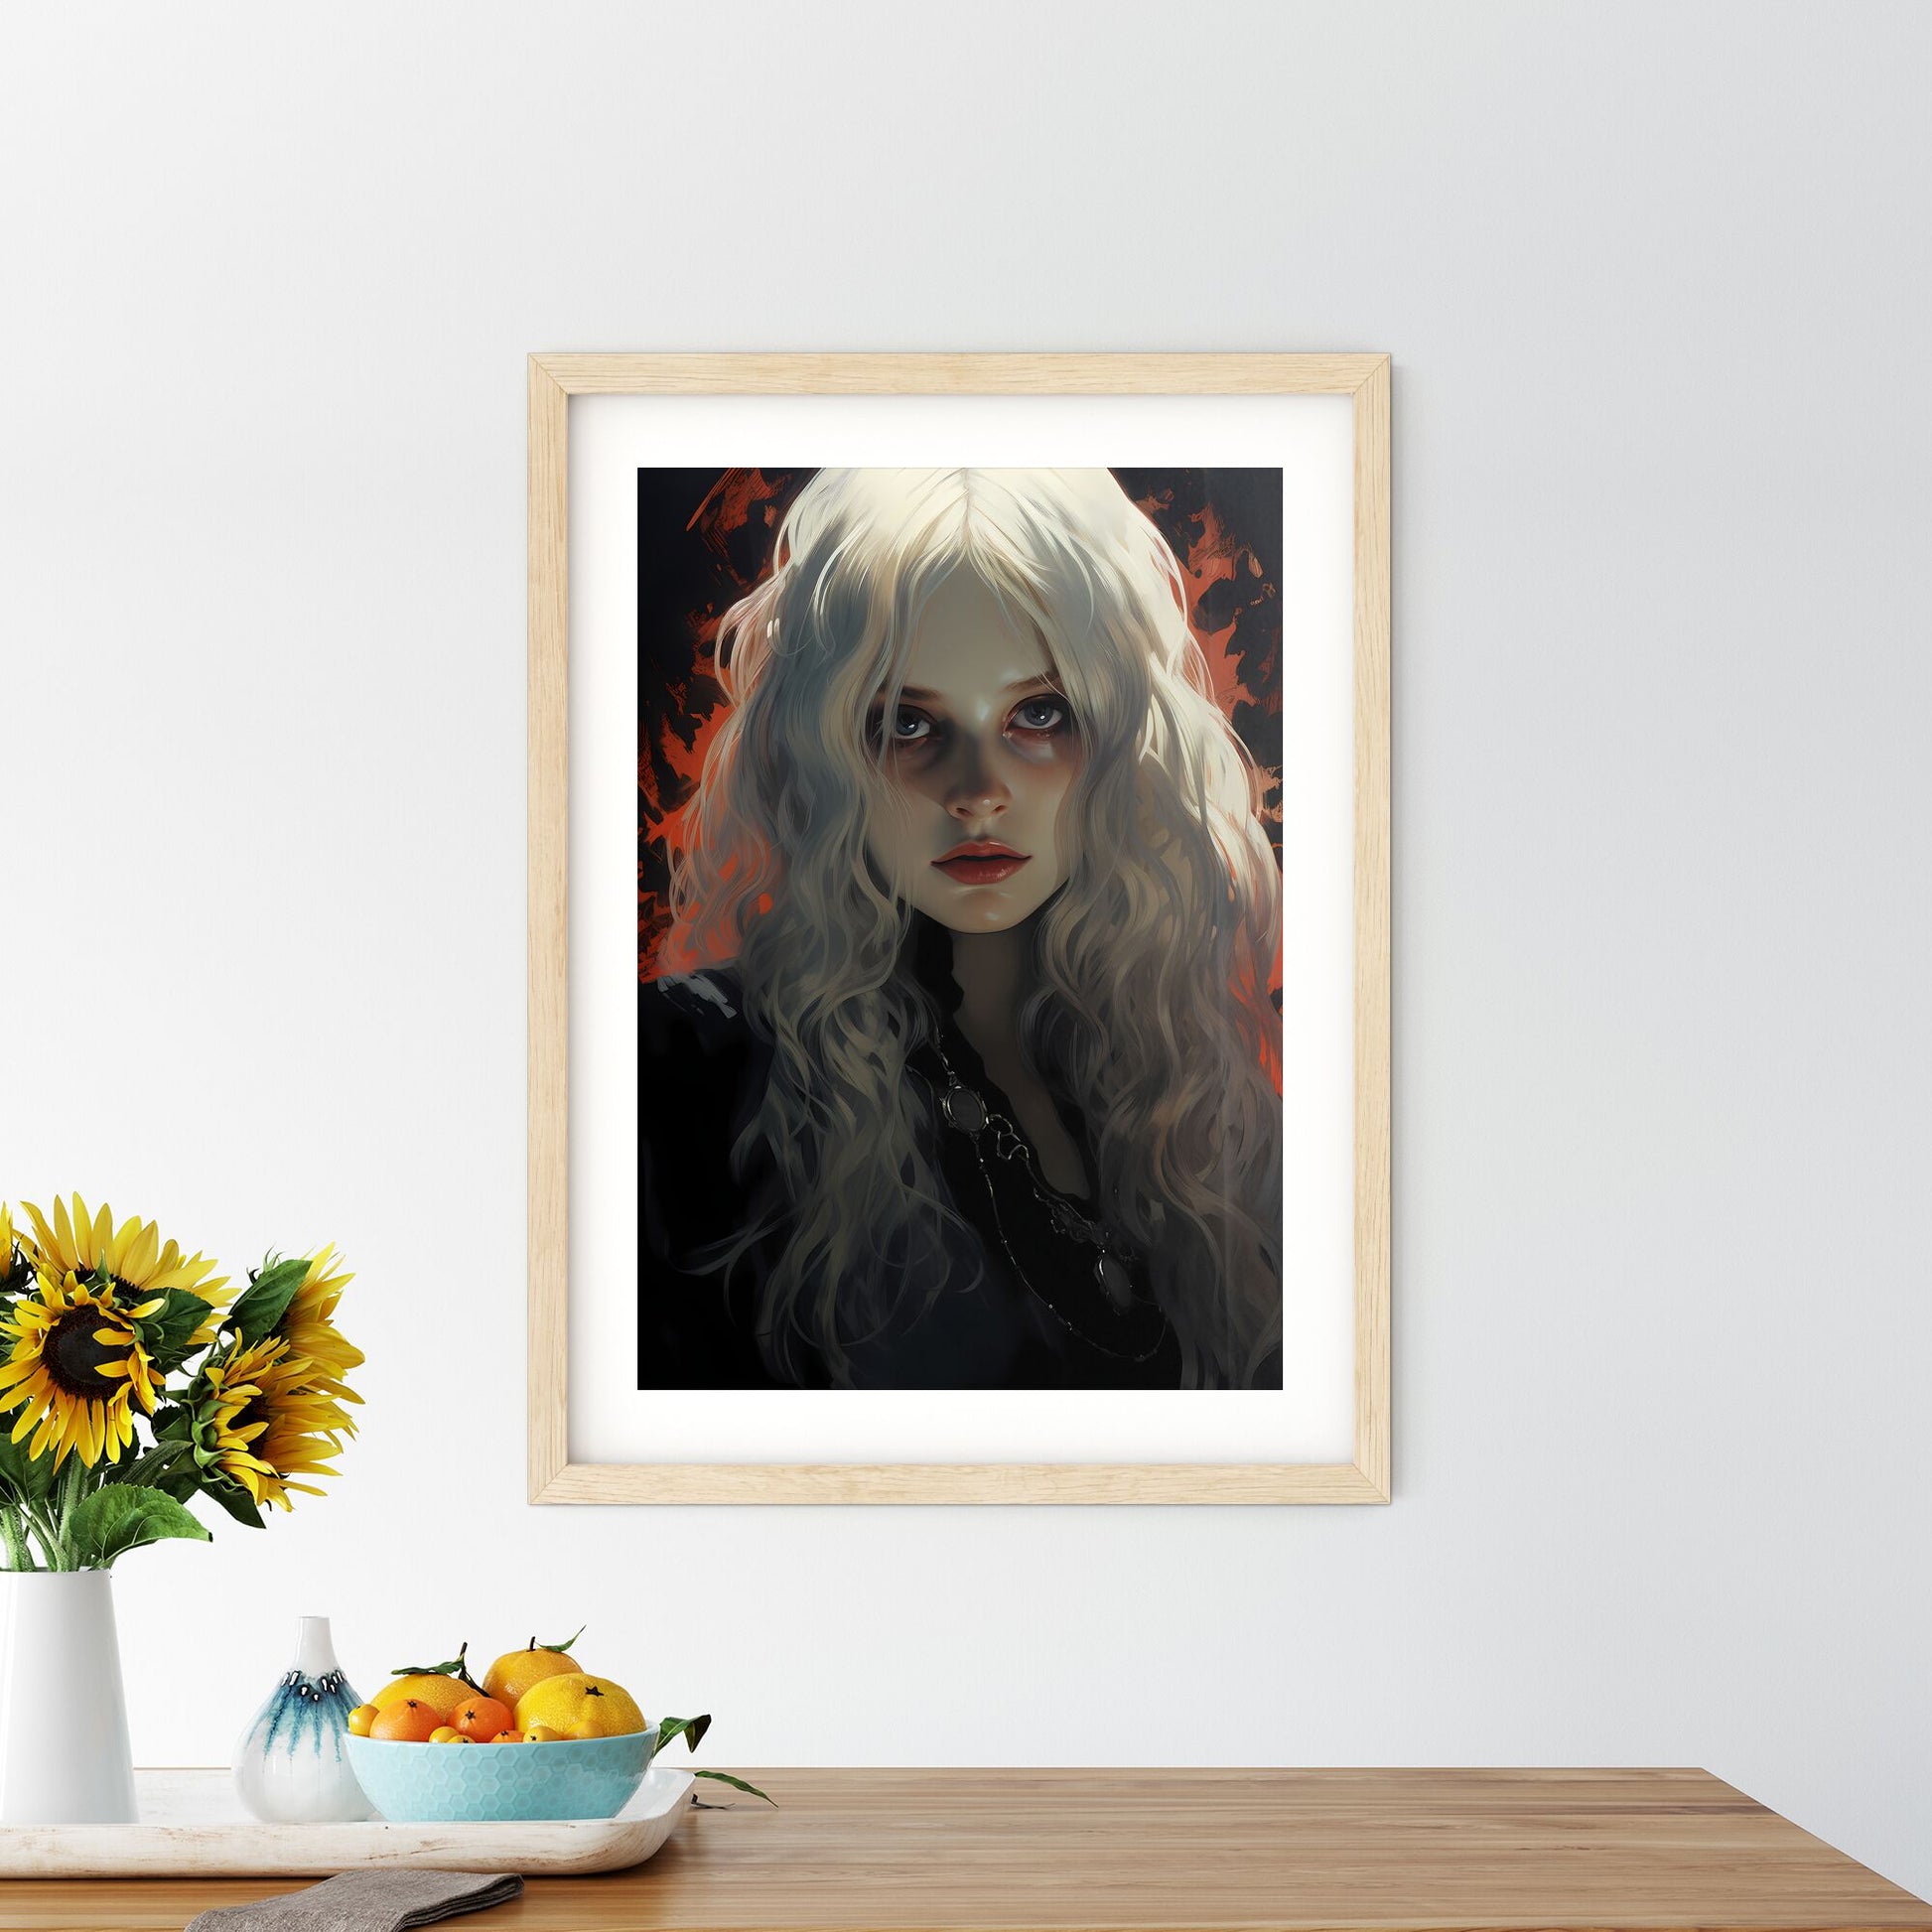 Dark Fantasy - A Woman With Long Blonde Hair Default Title